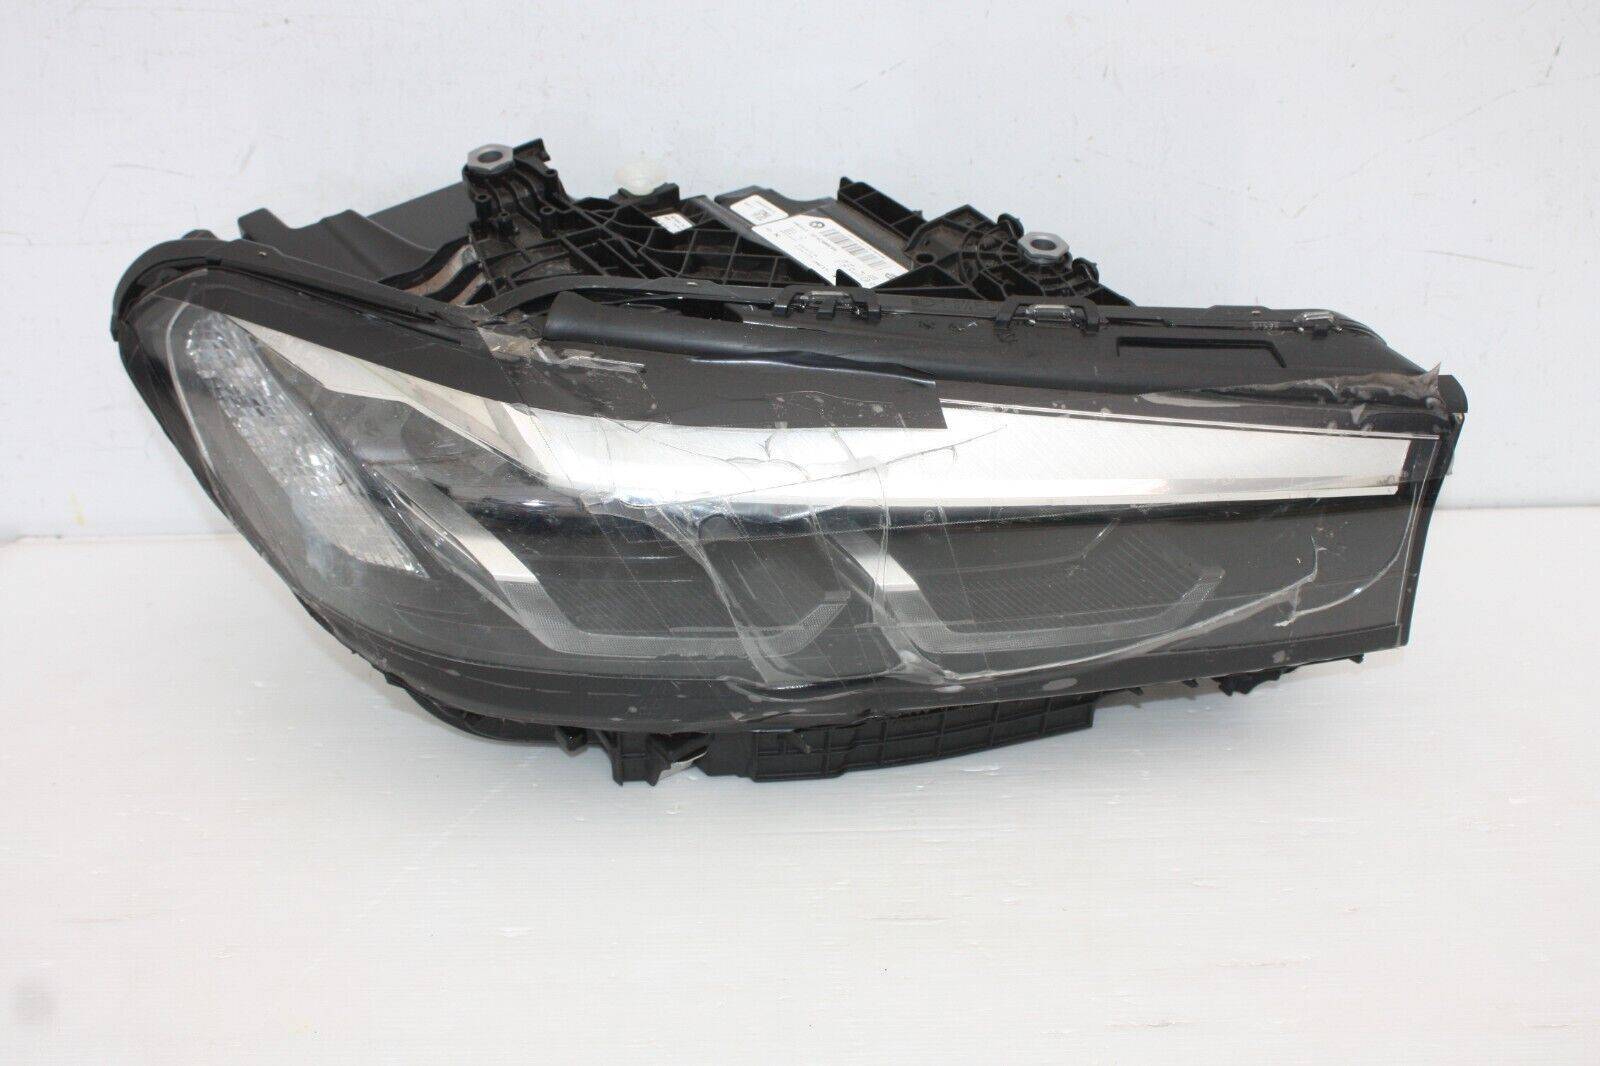 BMW-X5-X6-G05-G06-Right-Side-LED-Headlight-5A388C6-02-SEE-PICS-AS-ITS-DAMAGED-175444559307